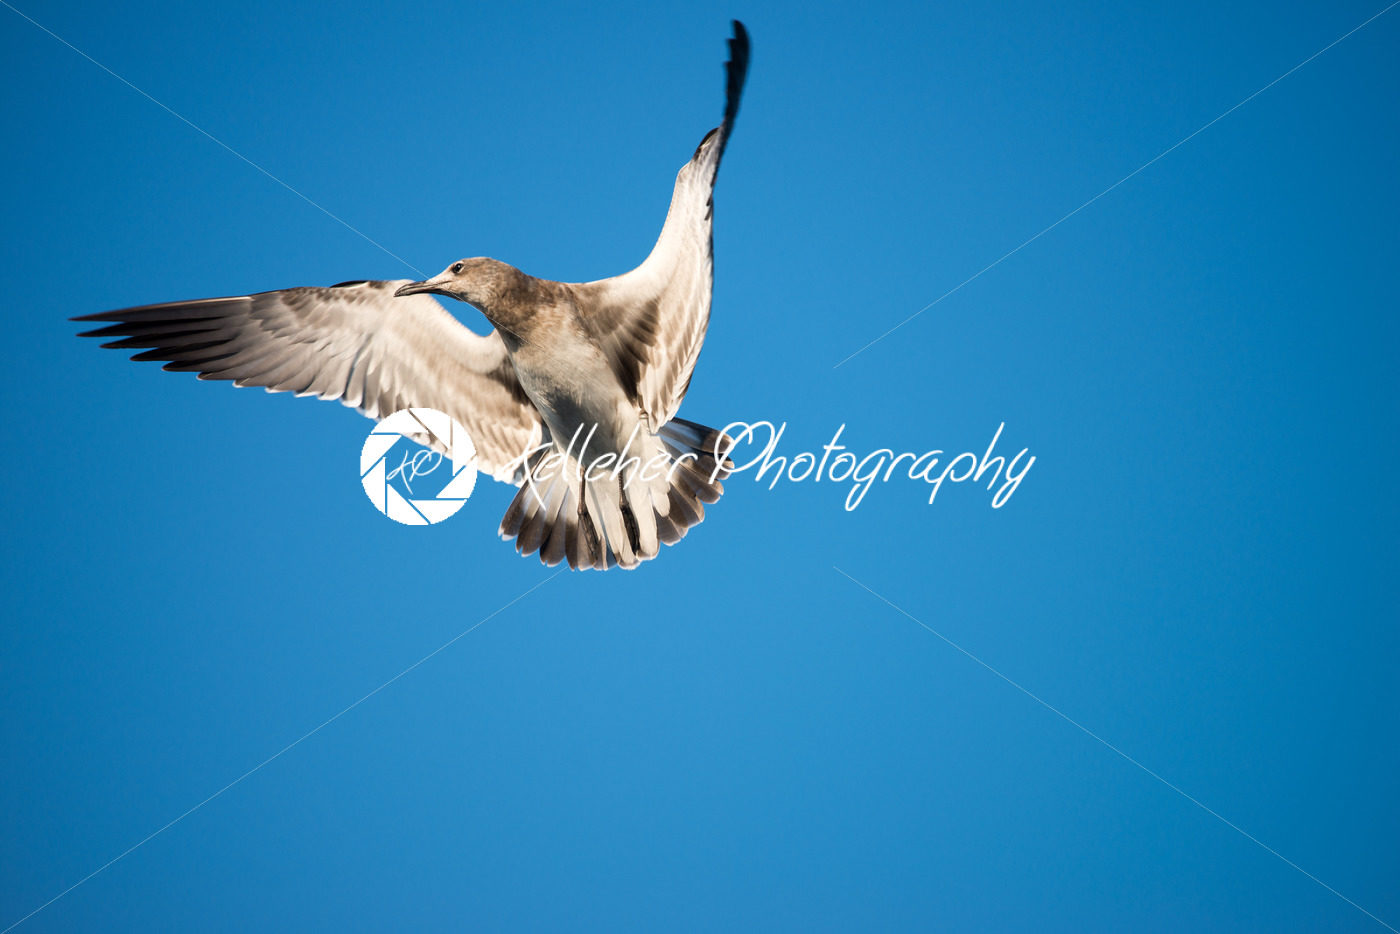 Seagull in flight against a cloudless blue sky background - Kelleher Photography Store